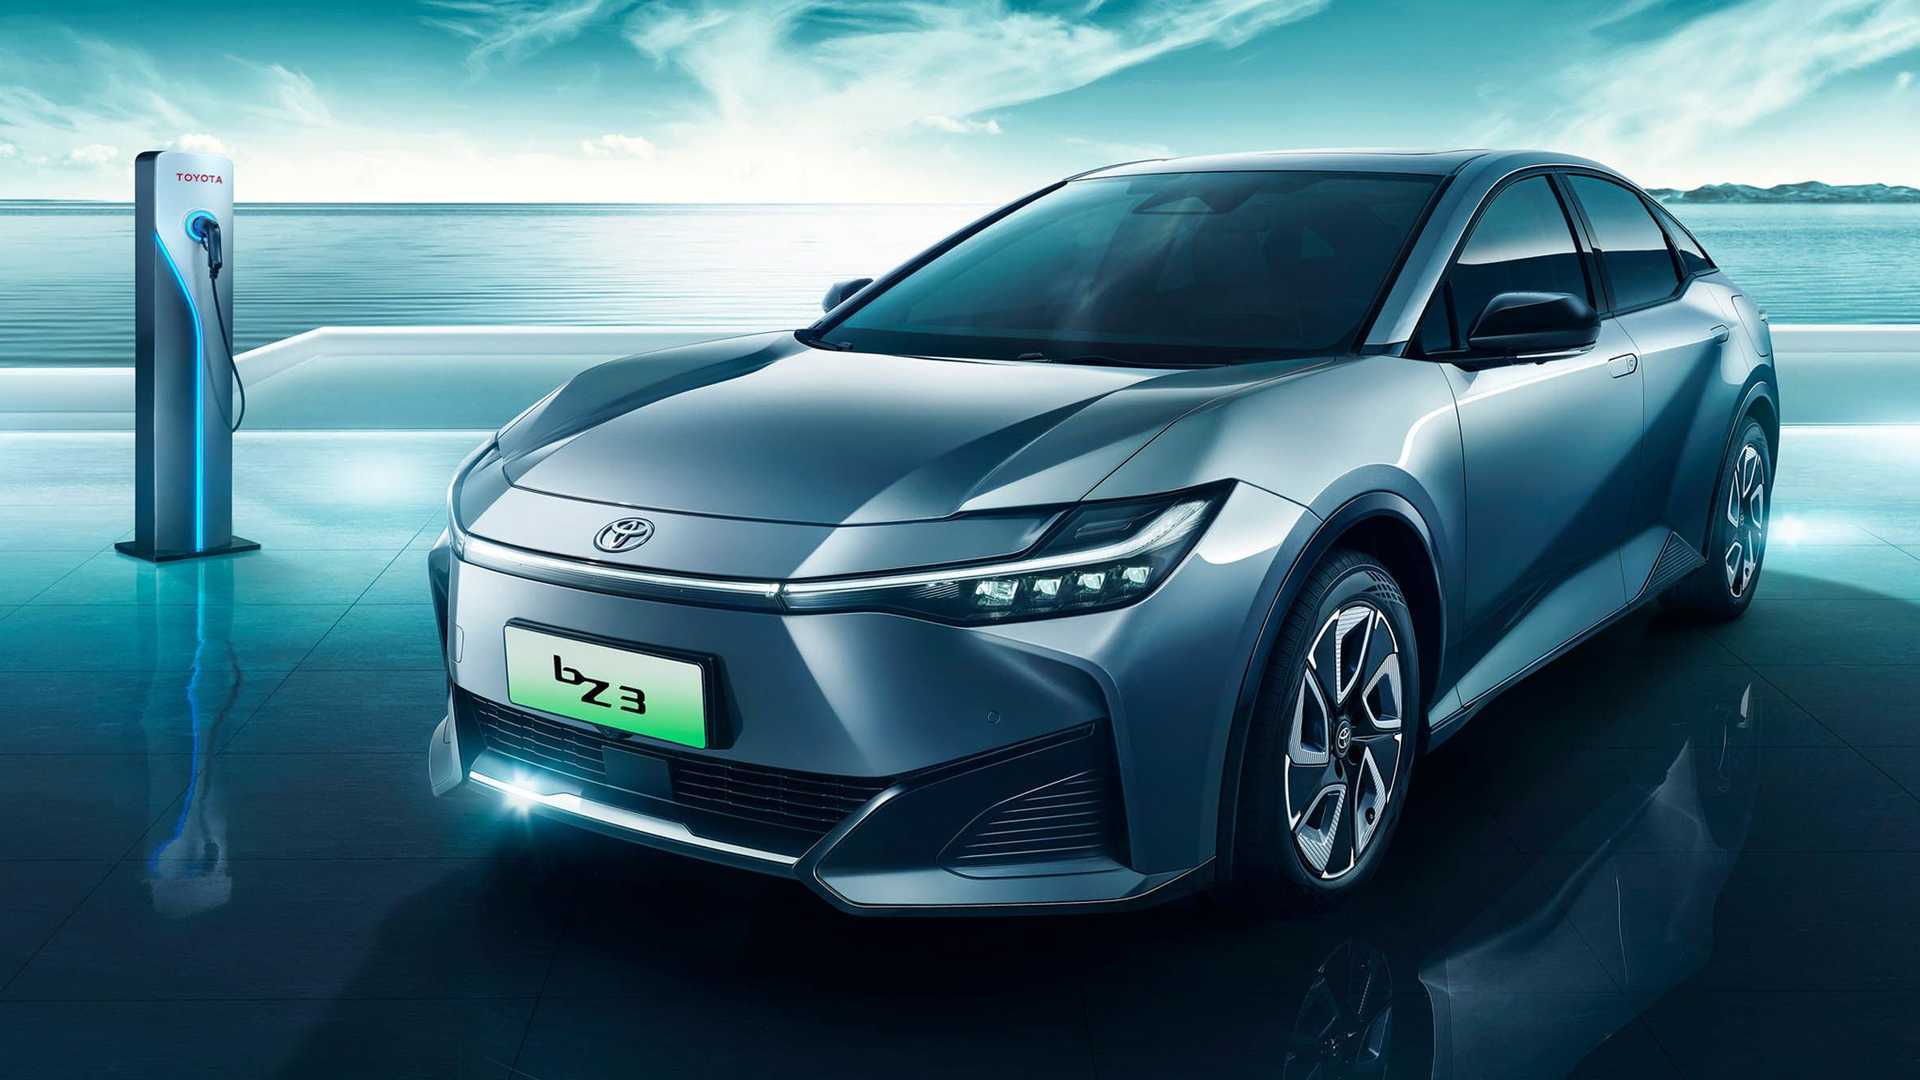 here’s how byd rocked toyota’s manufacturing world